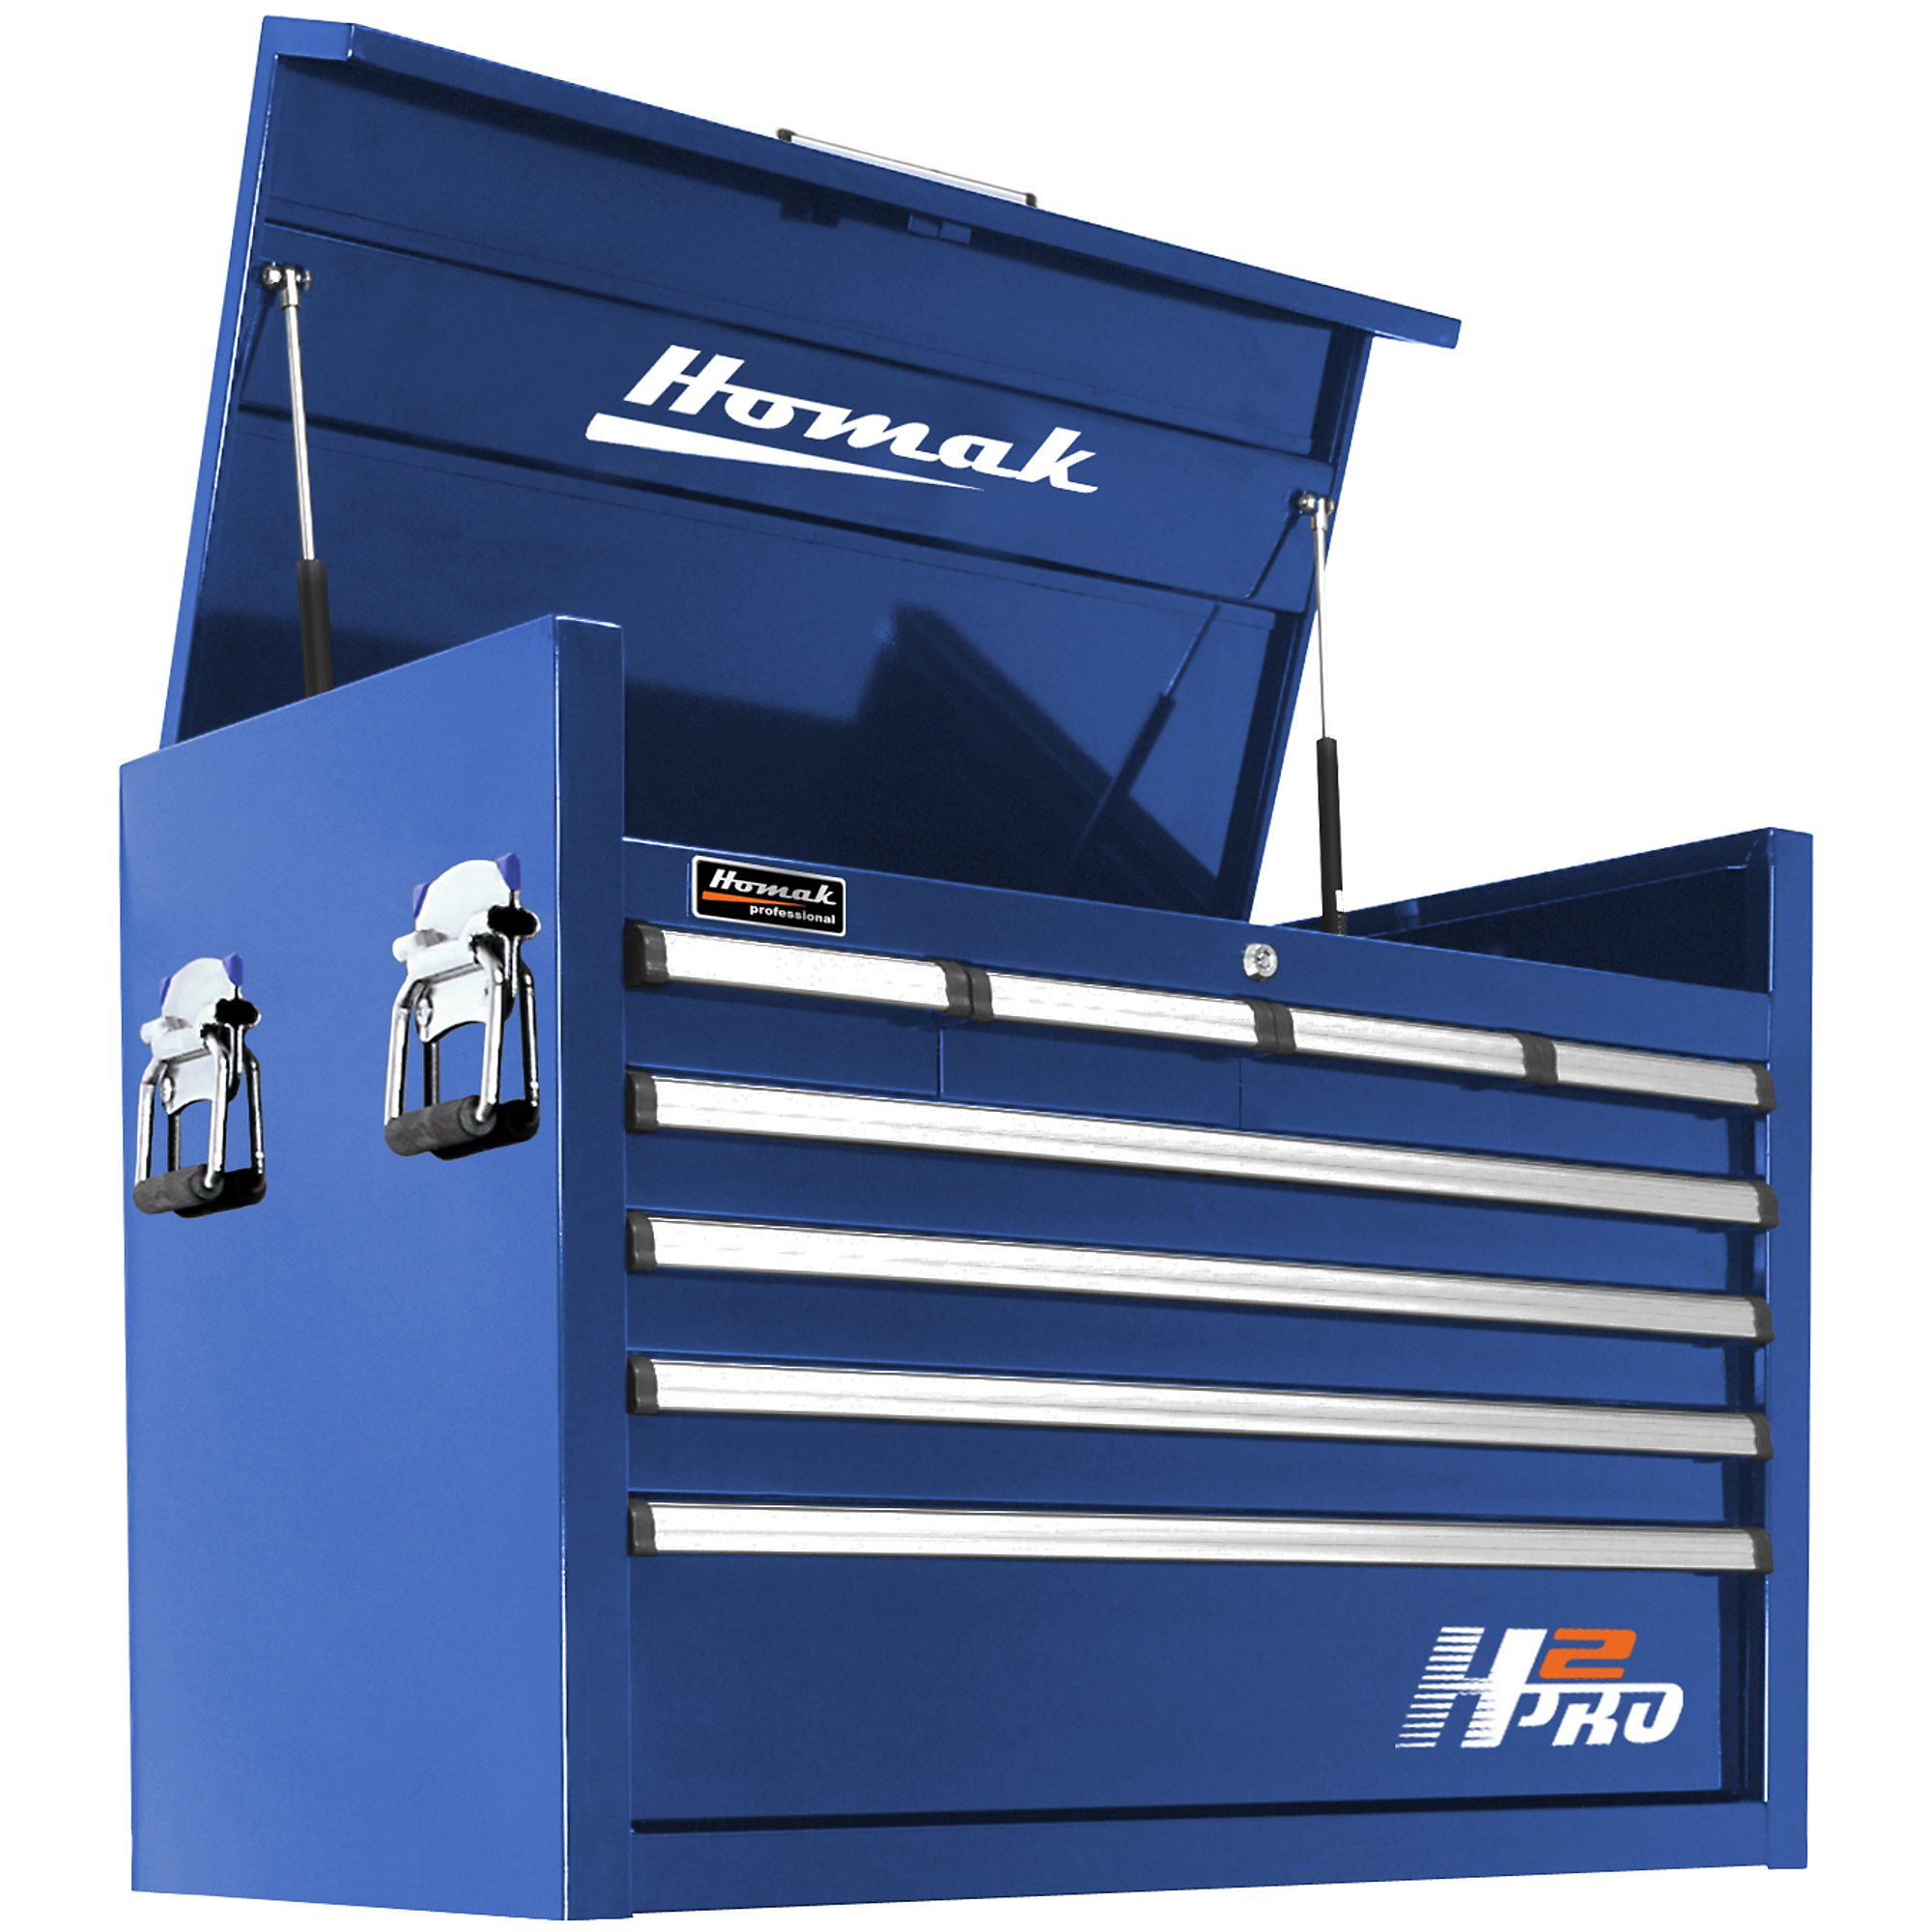 Homak H2PRO 36Inch 8-Drawer Top Tool Chest, Blue, 35 1/4Inch W x 21 3/4Inch D x 24 1/2Inch H, Model BL02036081